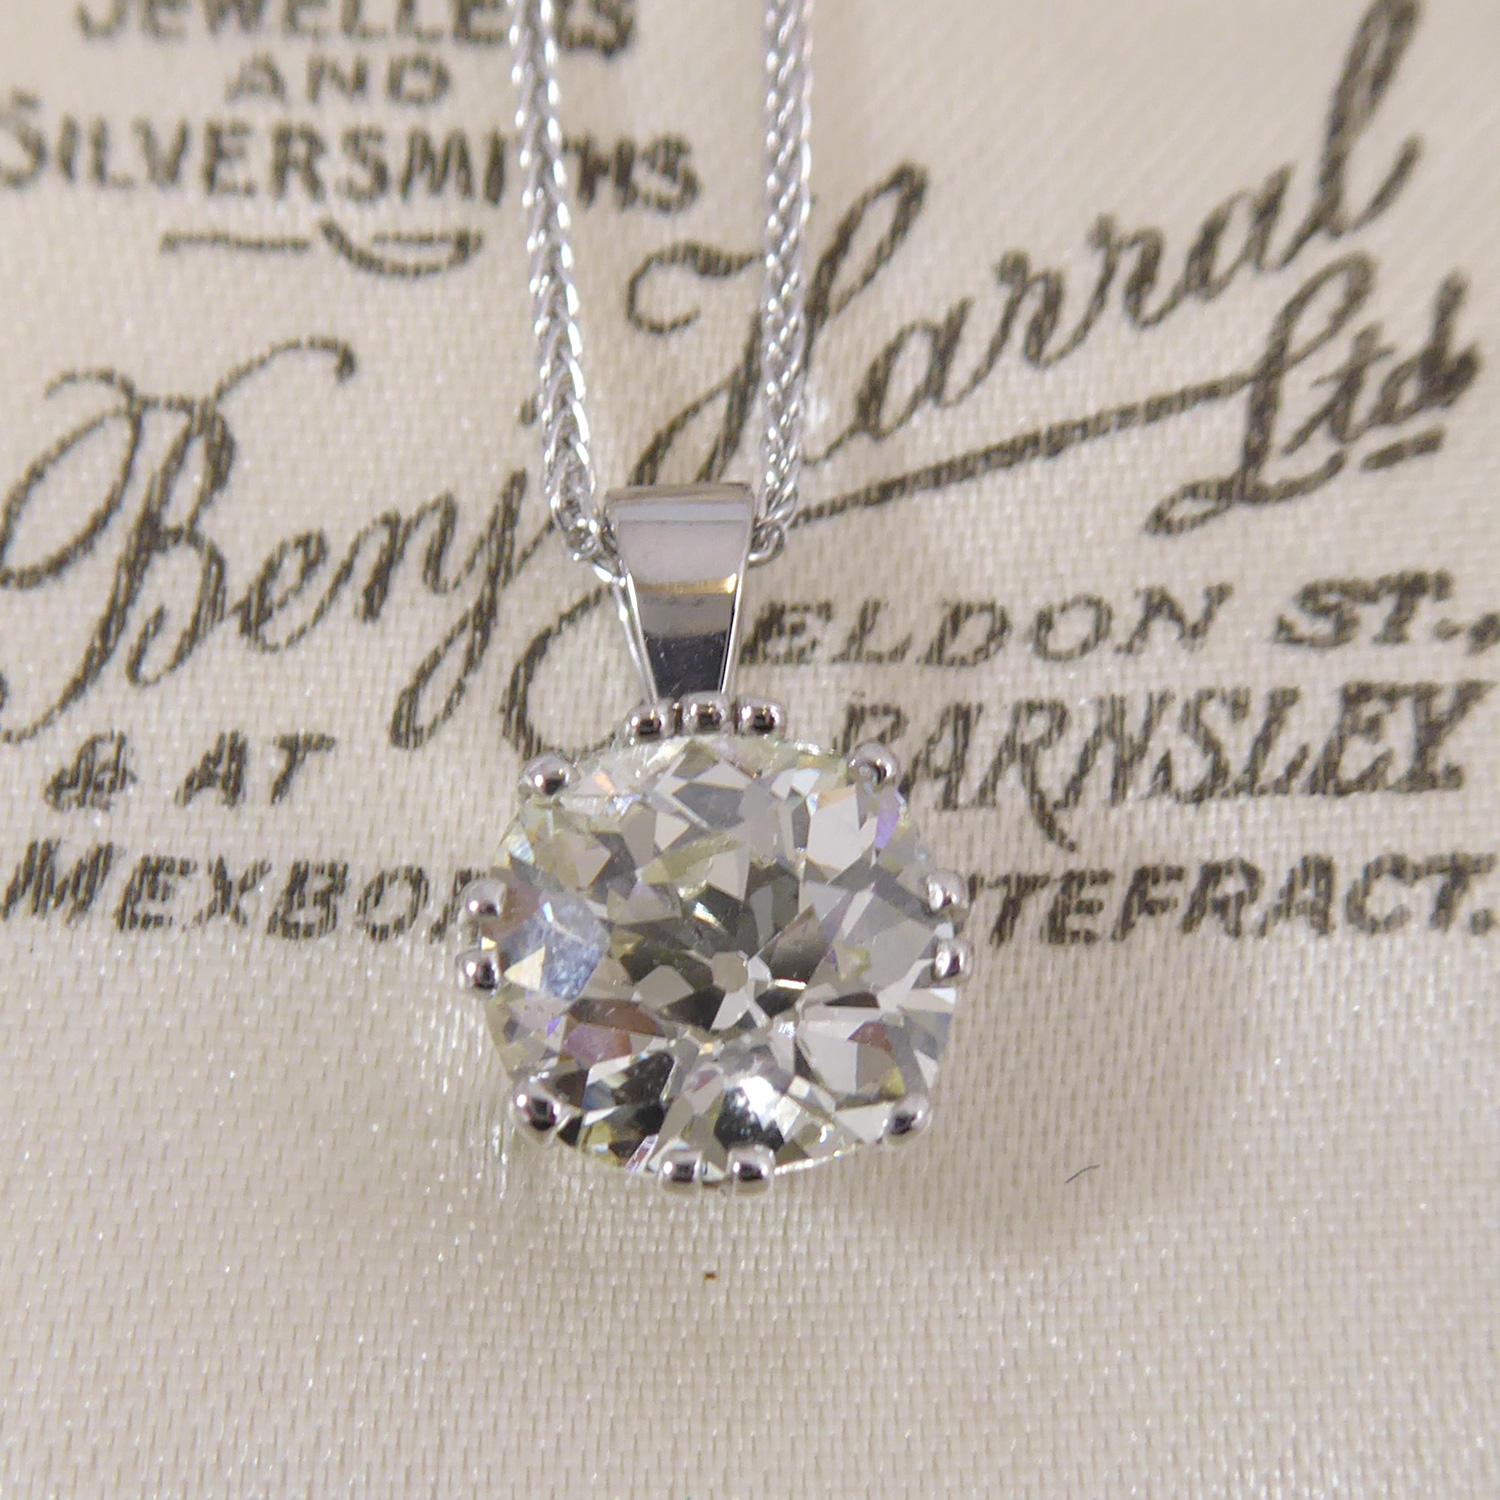 A diamond set pendant consisting of a cushion-shaped old European cut diamonds that measures 8.20mm x 8.00mm x 5.04mm deep.  We have reset this old diamond into a new platinum pendant.  It is claw set in a traditional white curtain style moun and